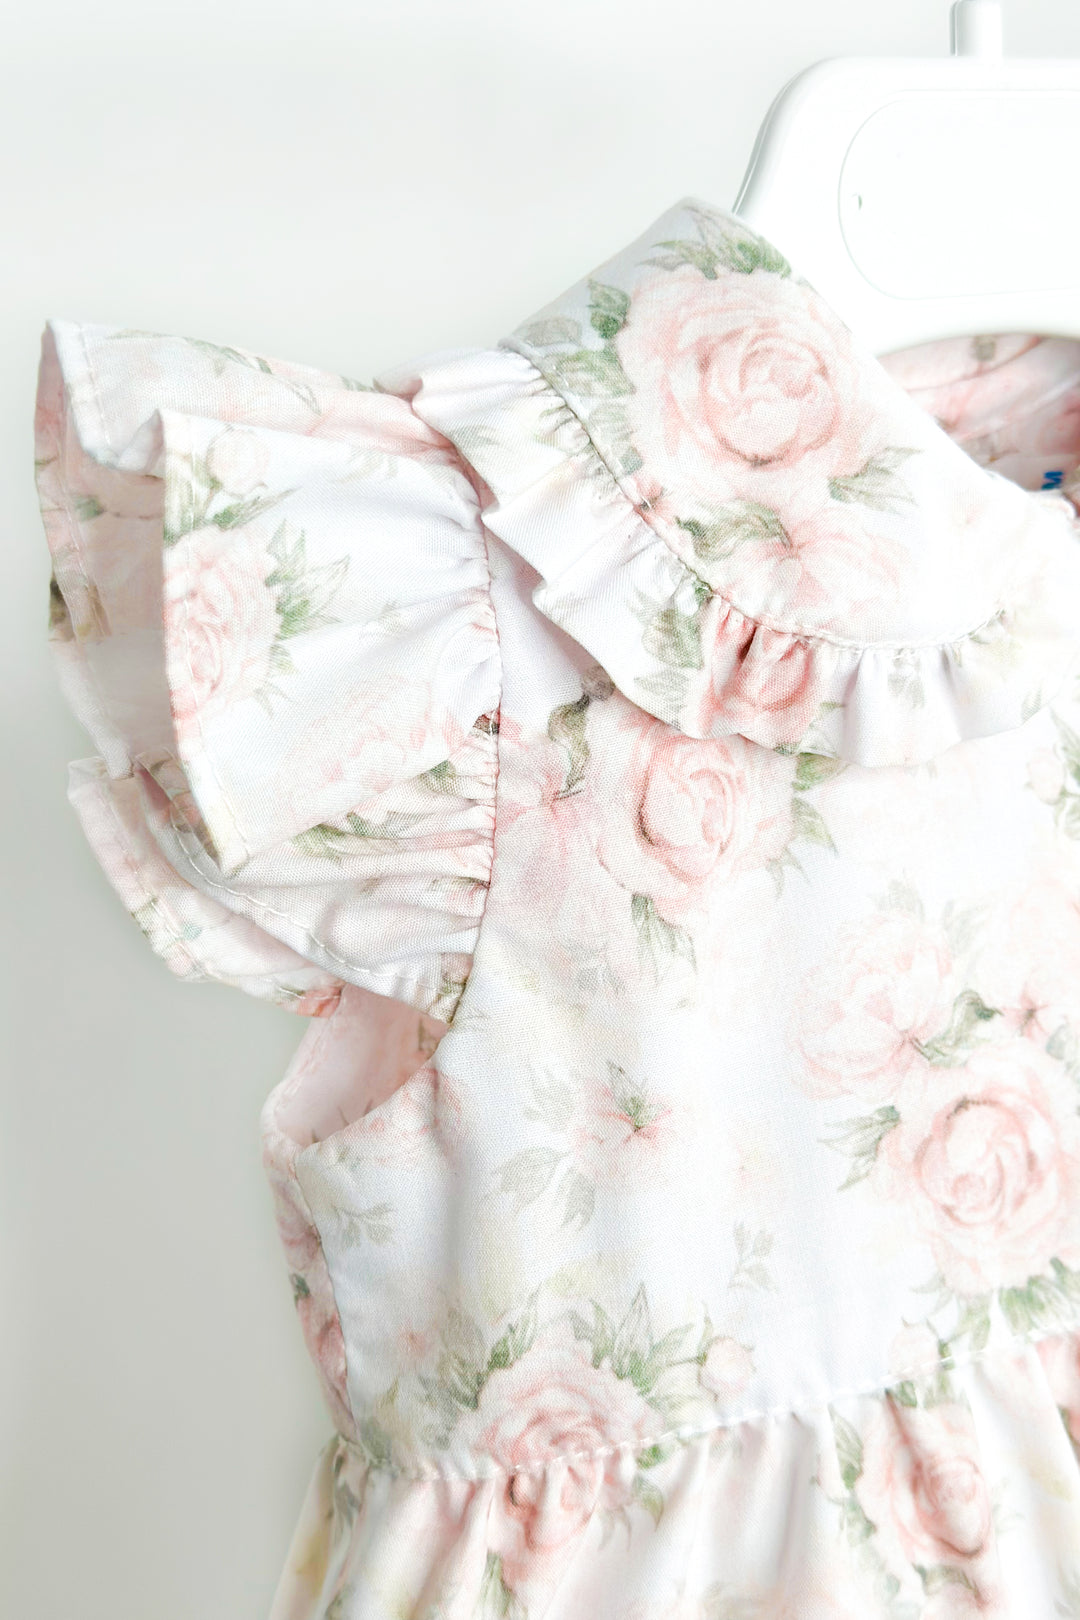 Puro Mimo "Wendy" Pale Pink Vintage Floral Romper | Millie and John